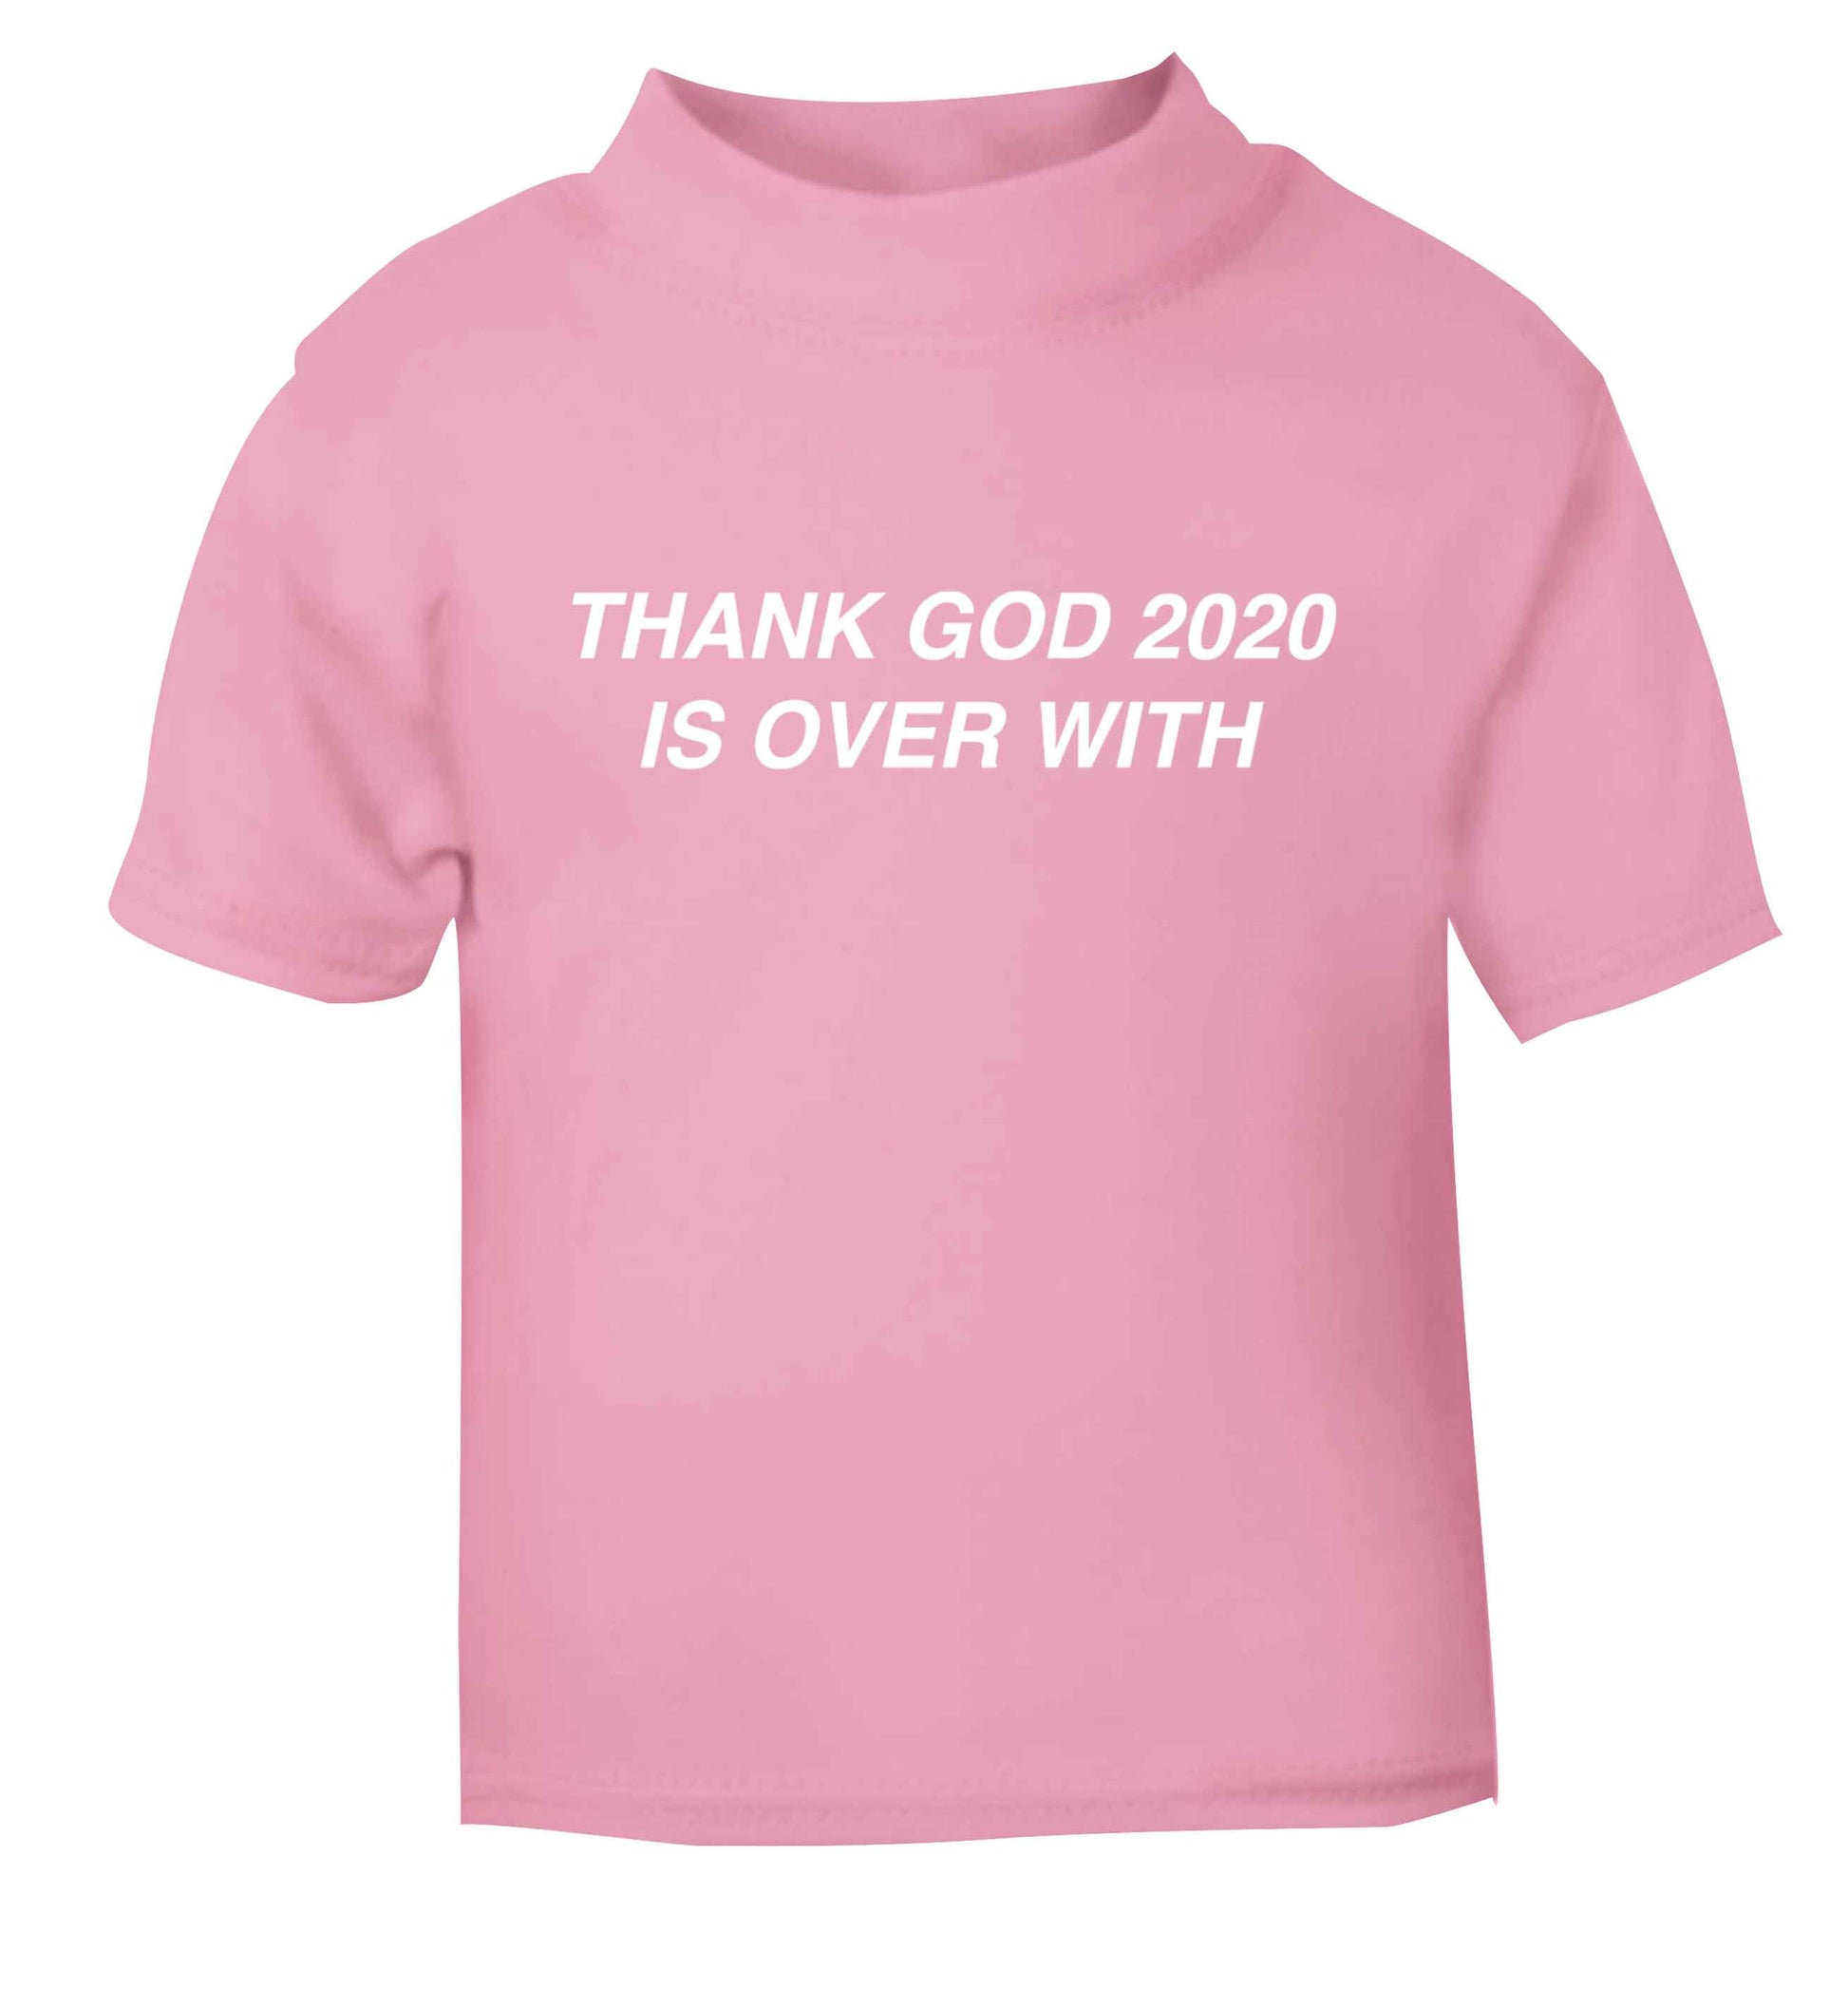 Thank god 2020 is over with light pink baby toddler Tshirt 2 Years